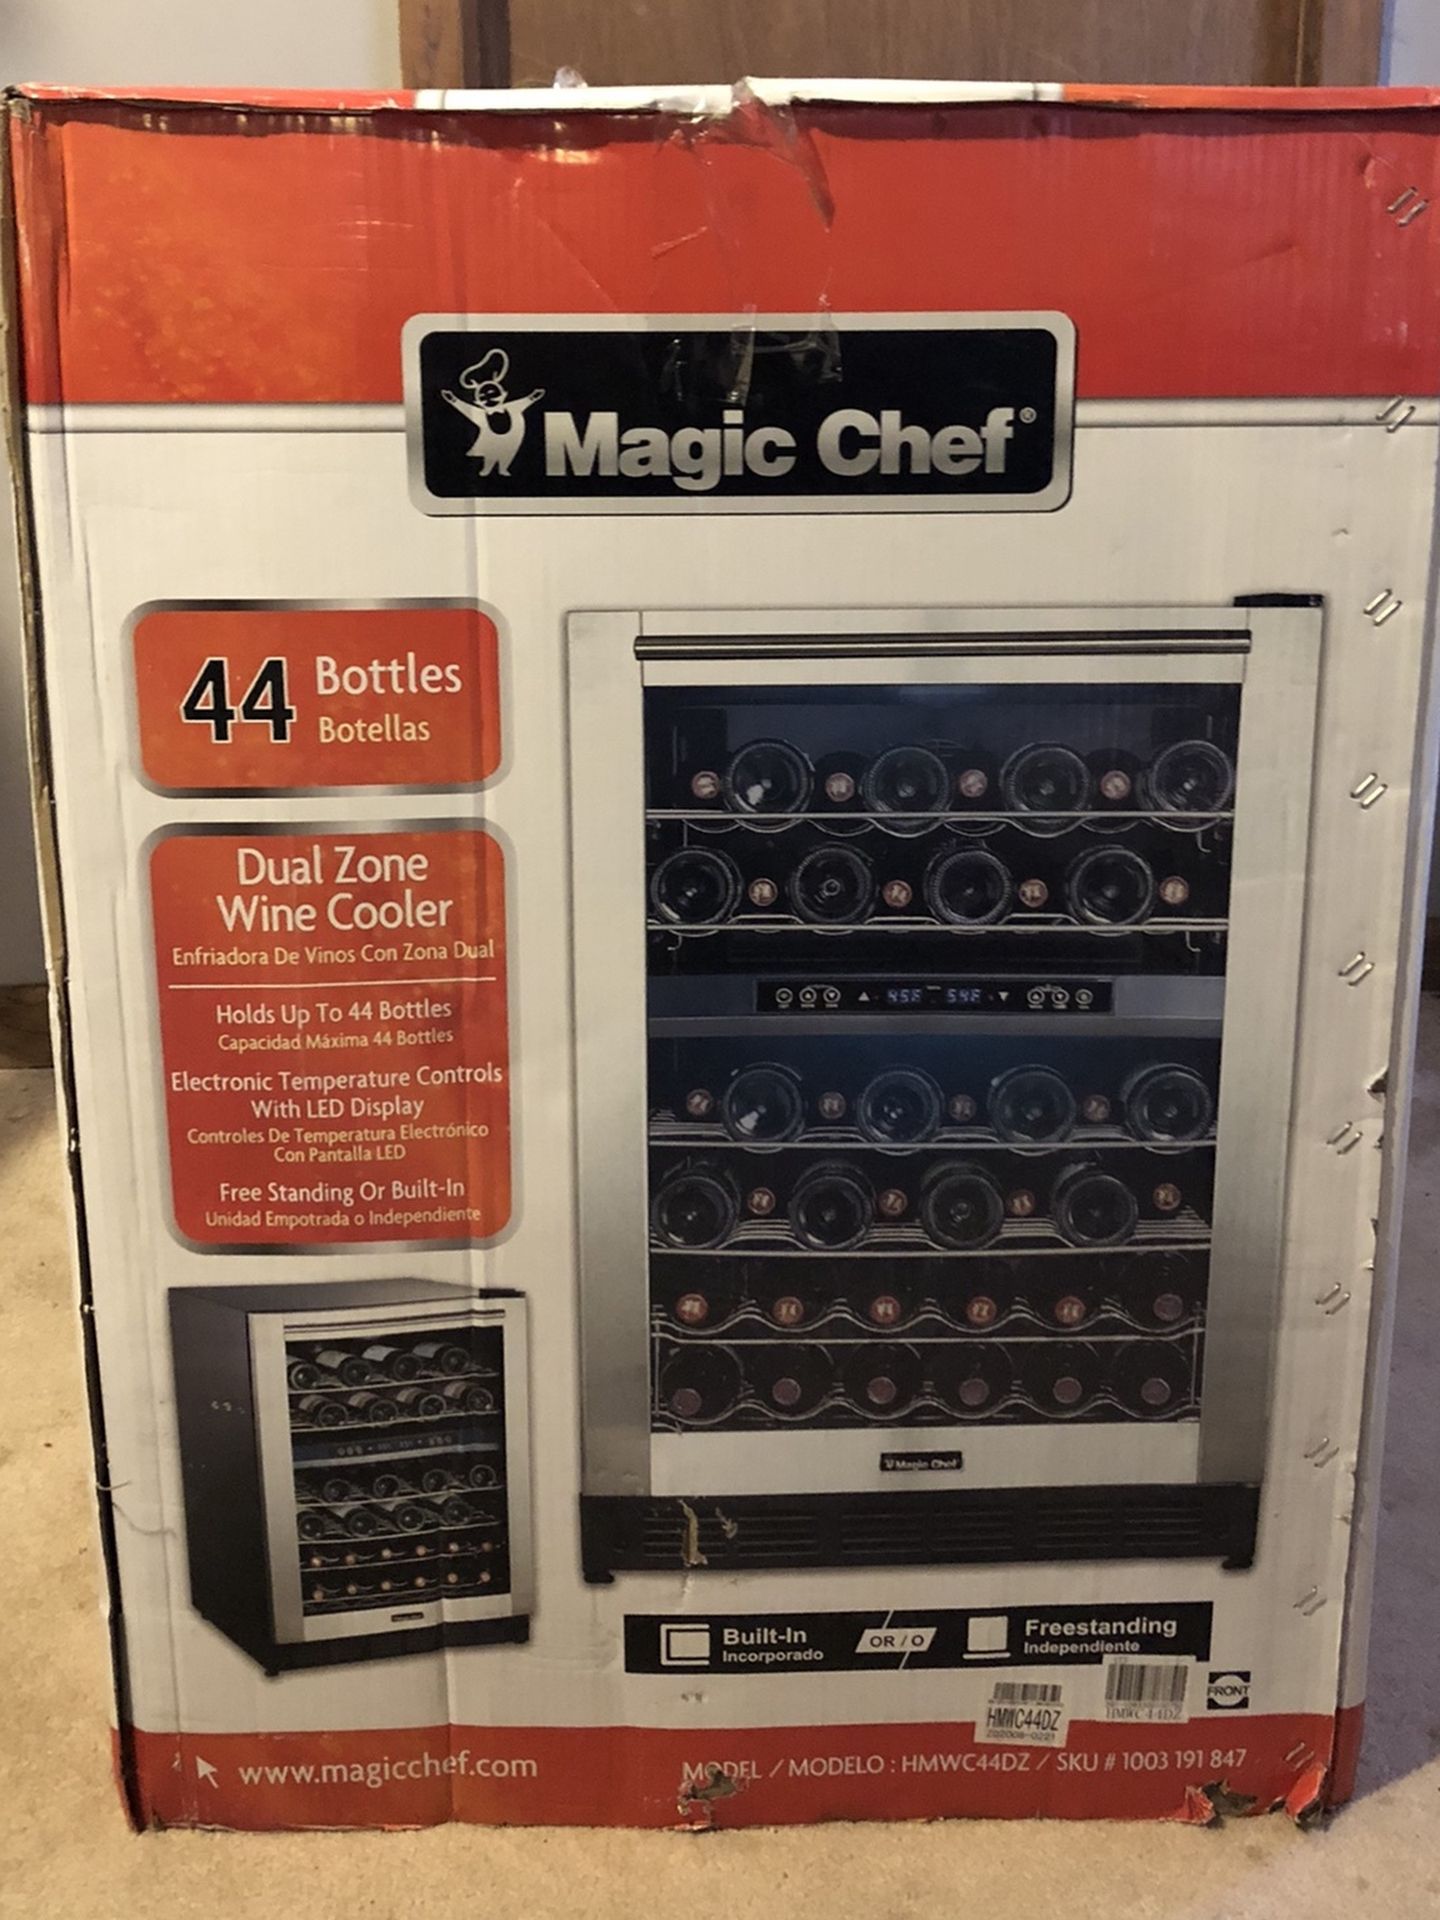 New Magic Chef 44 Bottle Dual Zone Wine Cooler in Stainless Steel